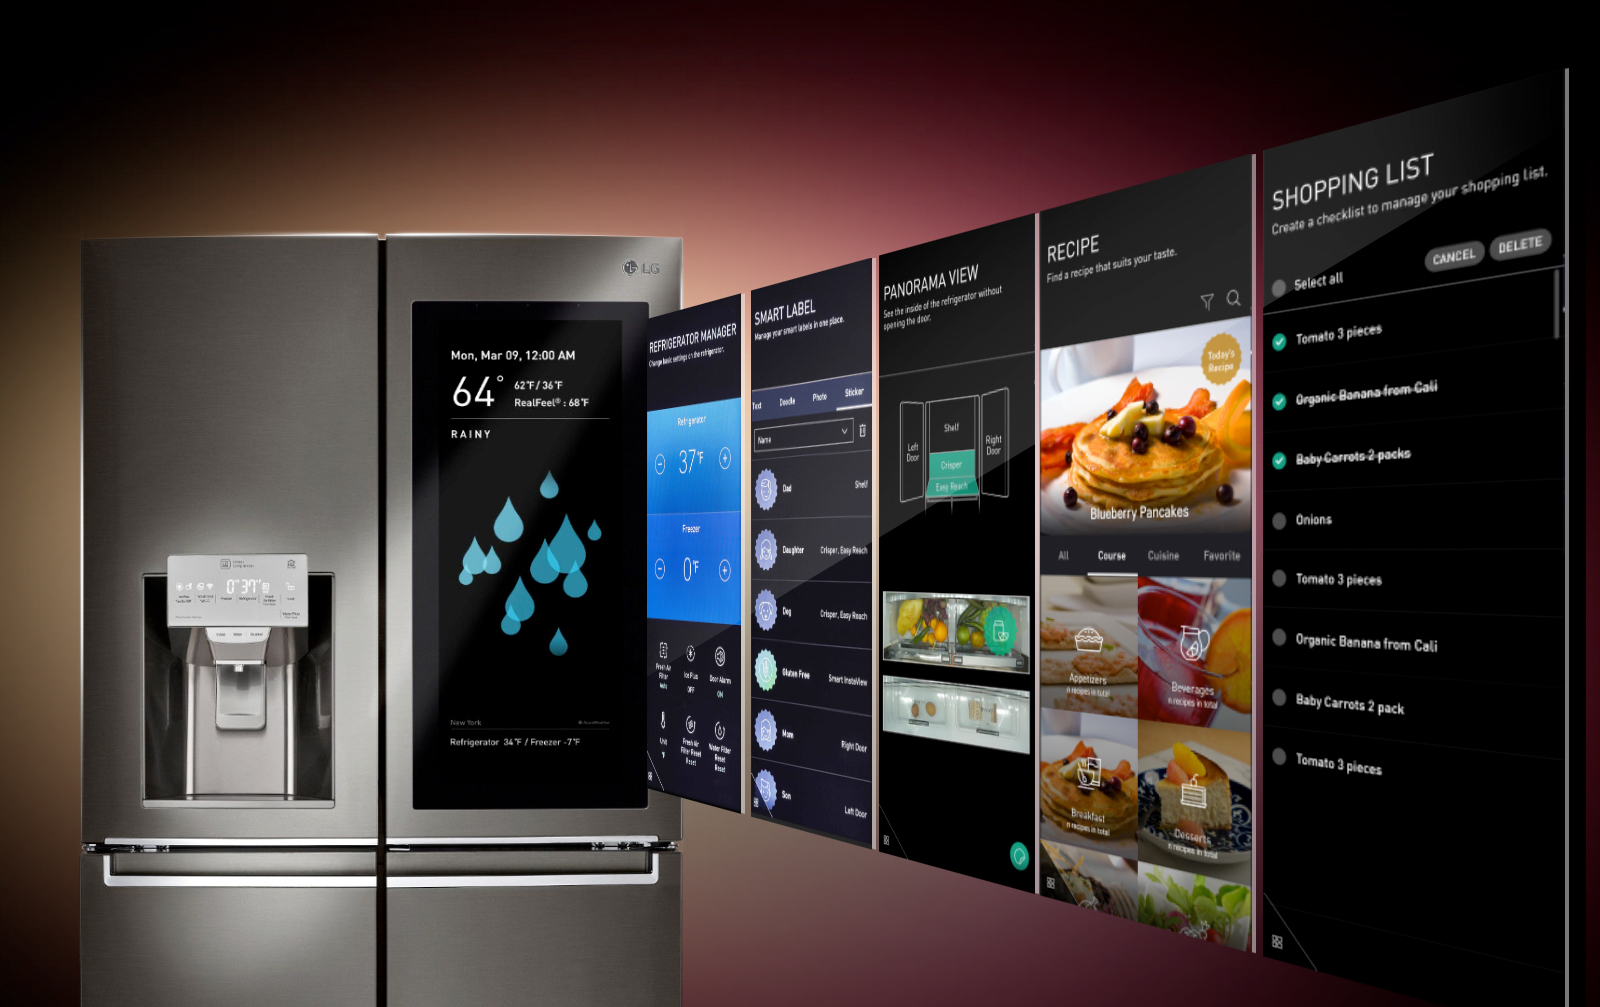 Boasting a large flat panel display in the door, the LG InstaView ThinQ Refrigerator brings a long list of smart features and has the Amazon Alexa assistant built in. Image: LG.